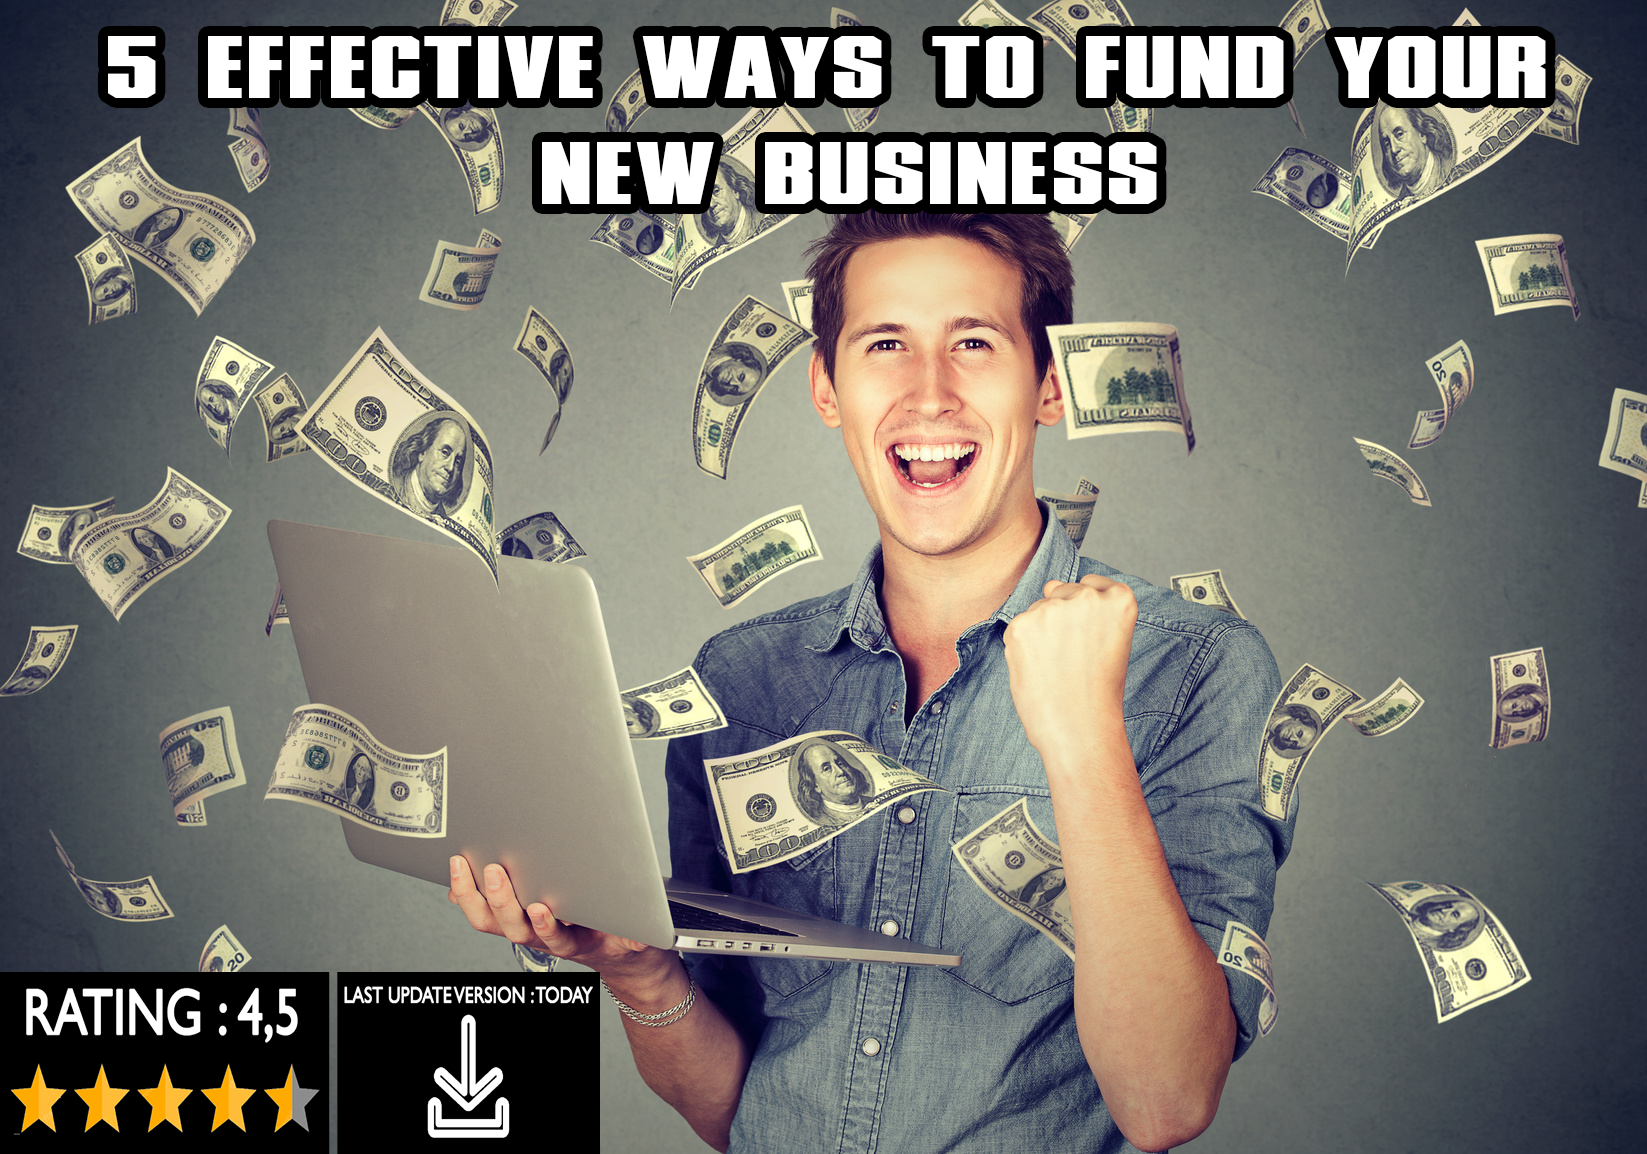 5 Effective Ways to Fund Your New Business